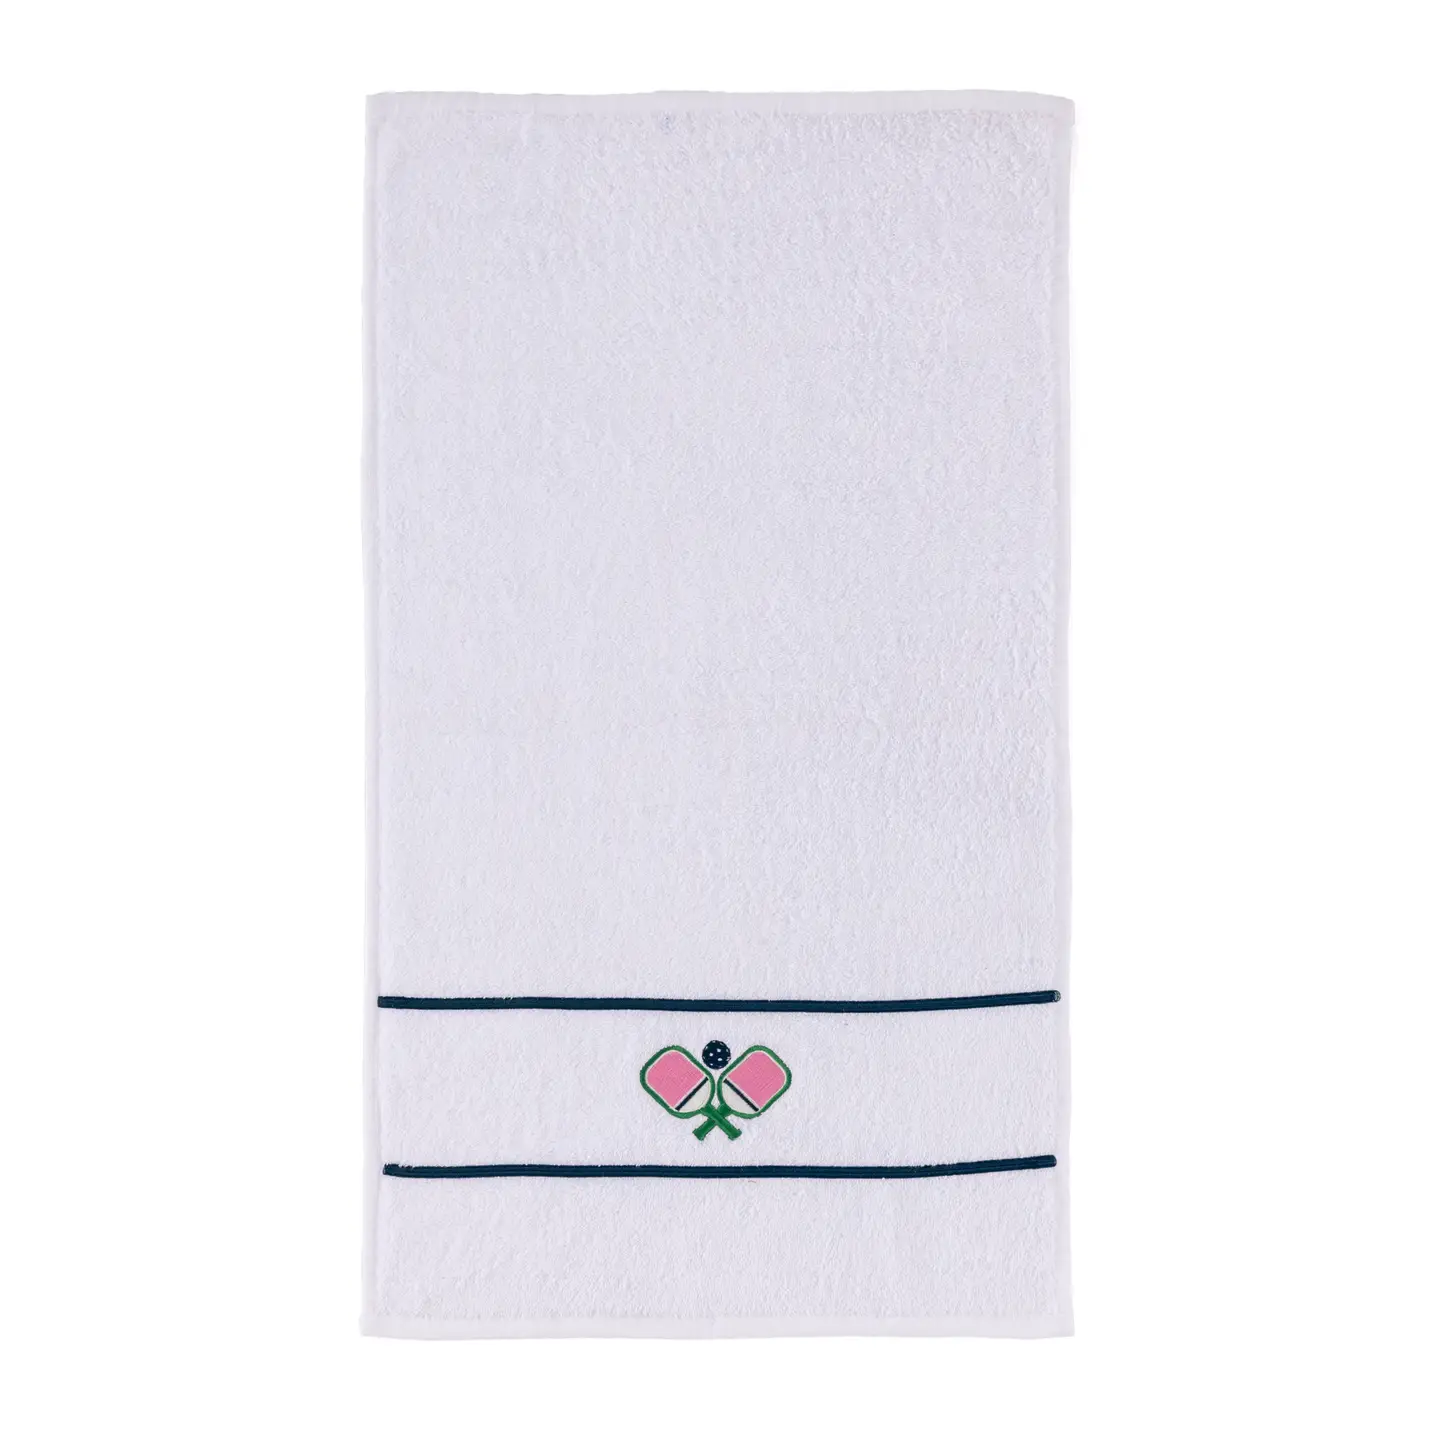 PICKLE BALL PADDLES TOWEL IN WHITE